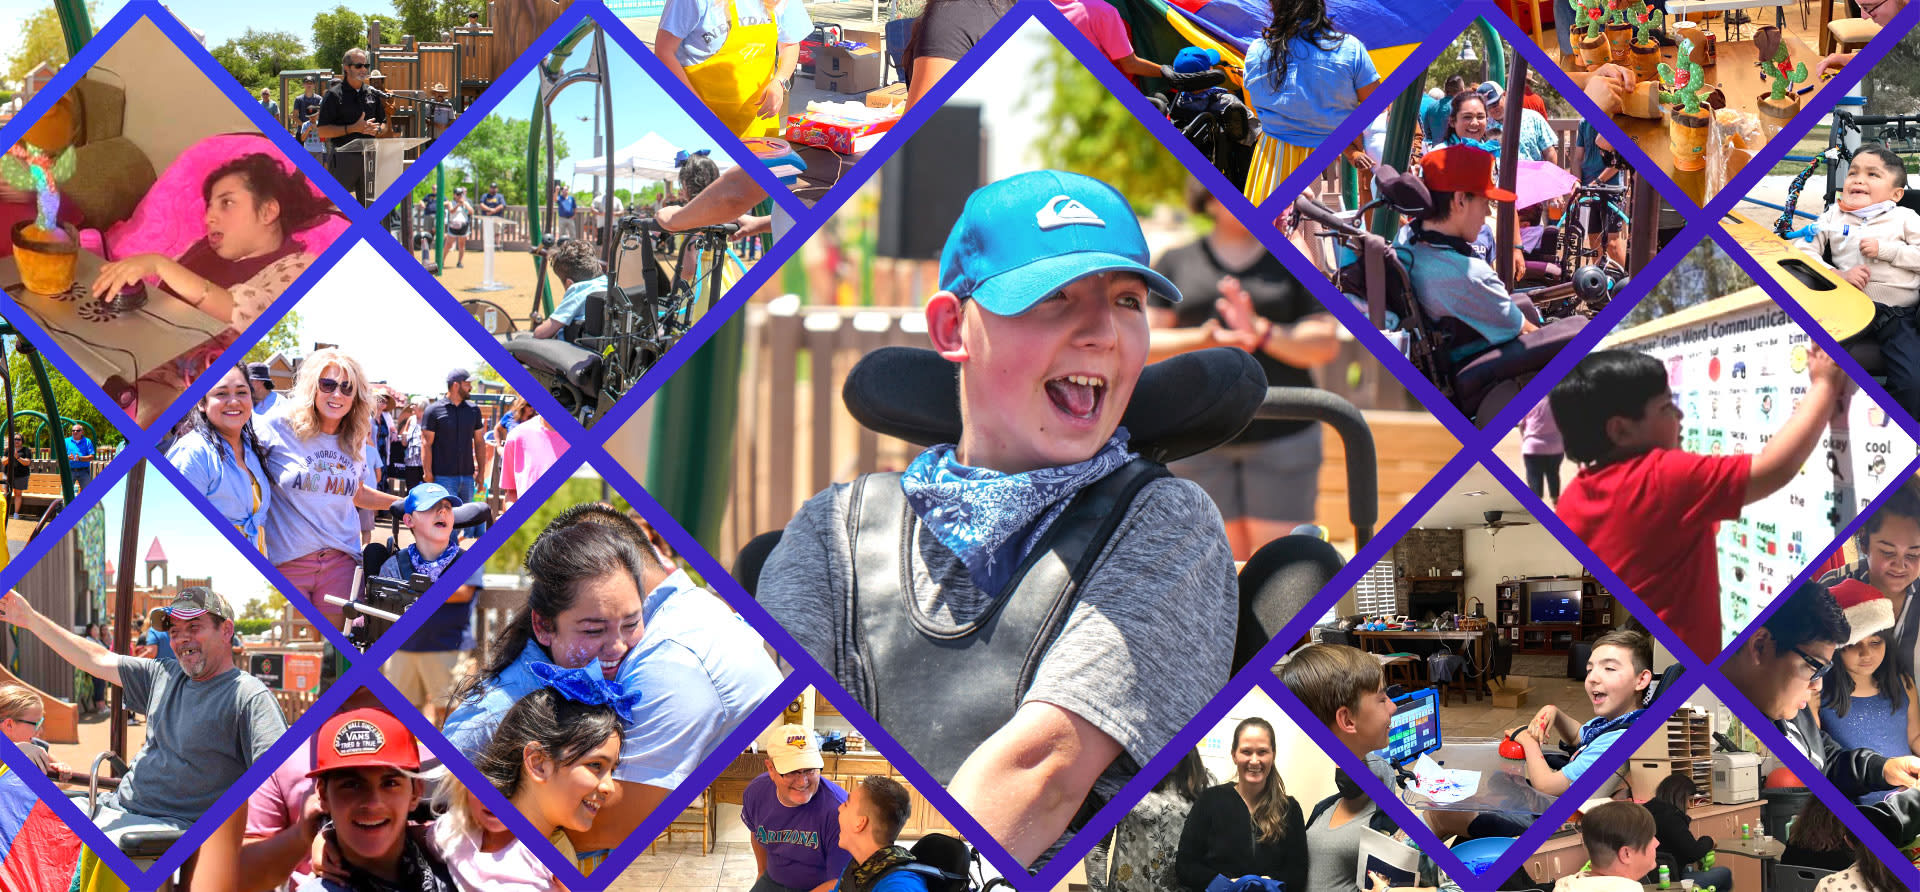 A collage of images showing a variety of happy people enjoying inclusive activities